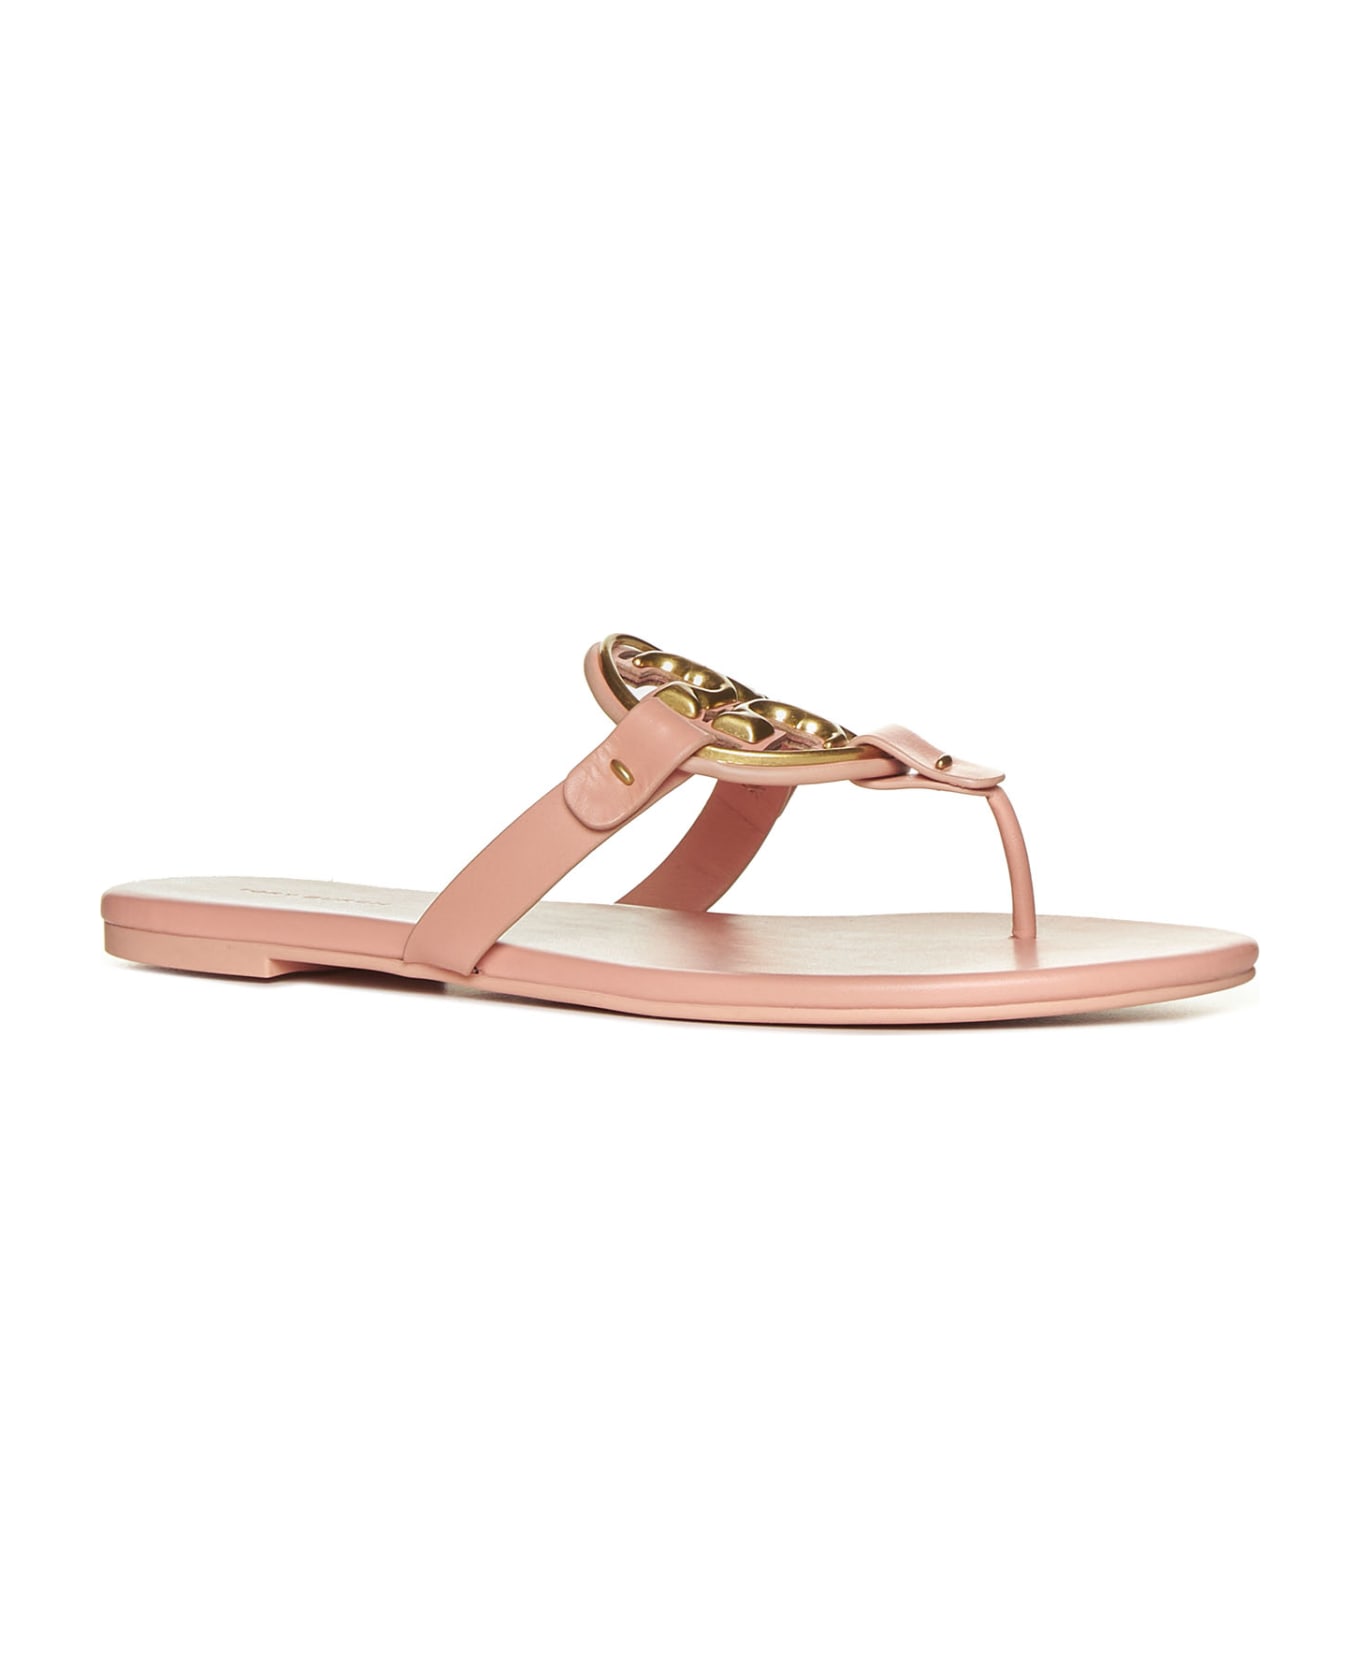 Tory Burch Miller Leather Flat Sandals - Sweet tooth gold